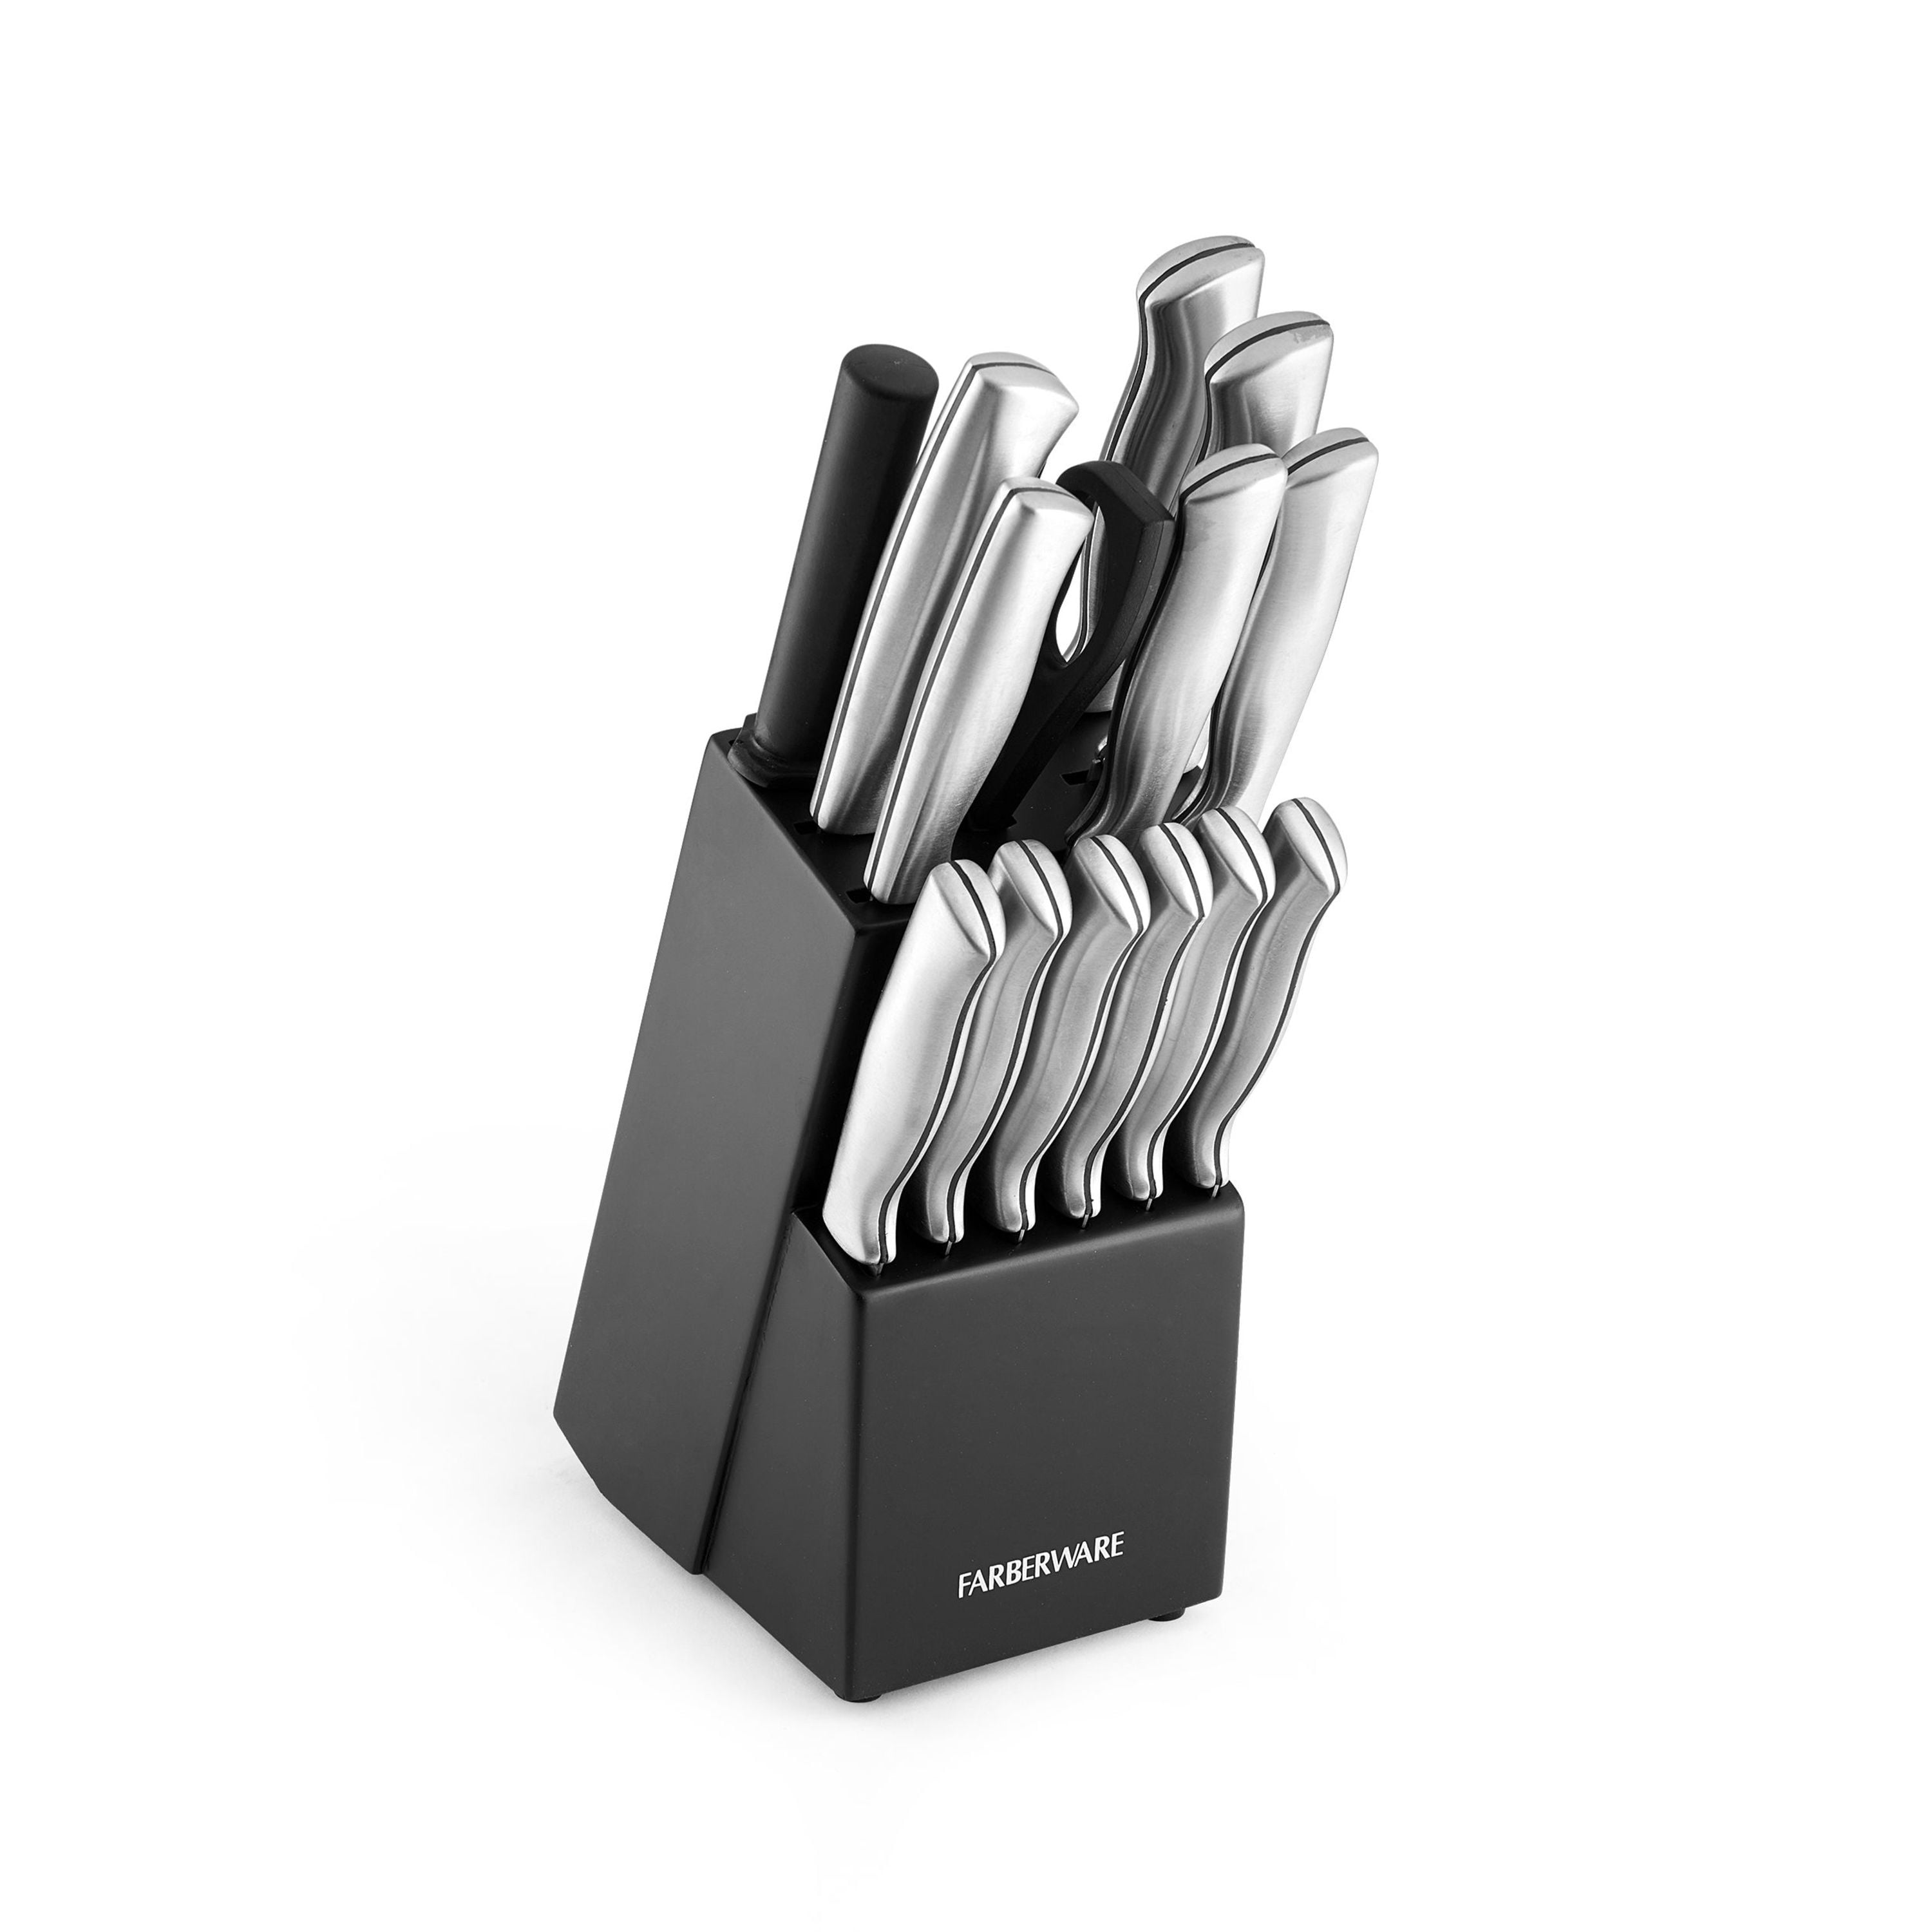 Cuisinart 15pc Stainless Steel Hollow Handle Cutlery Block Set 